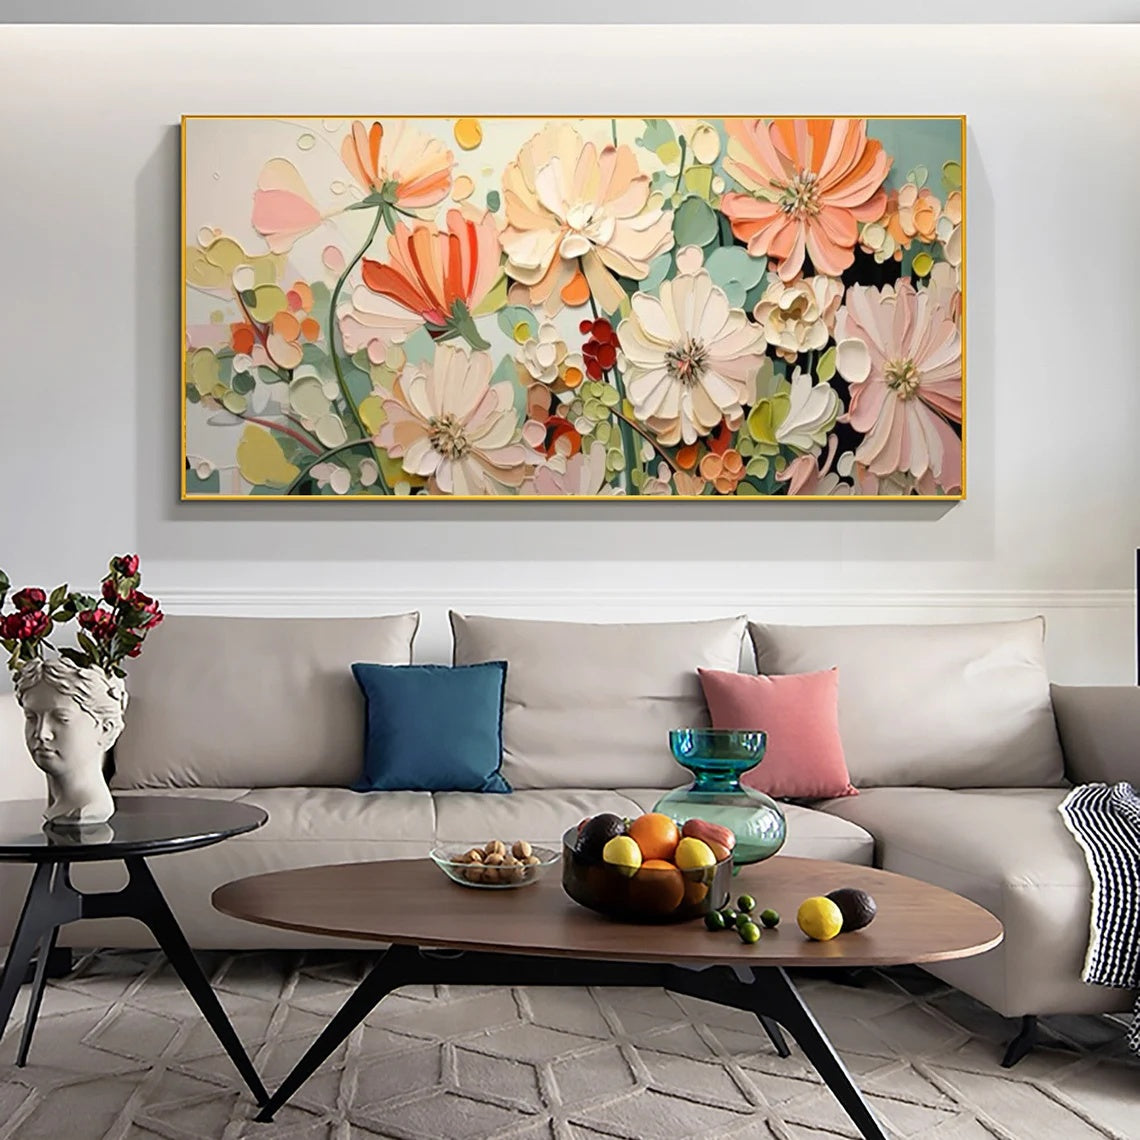 Blossoming Joy: A Client’s Love Letter to Floral Oil Painting